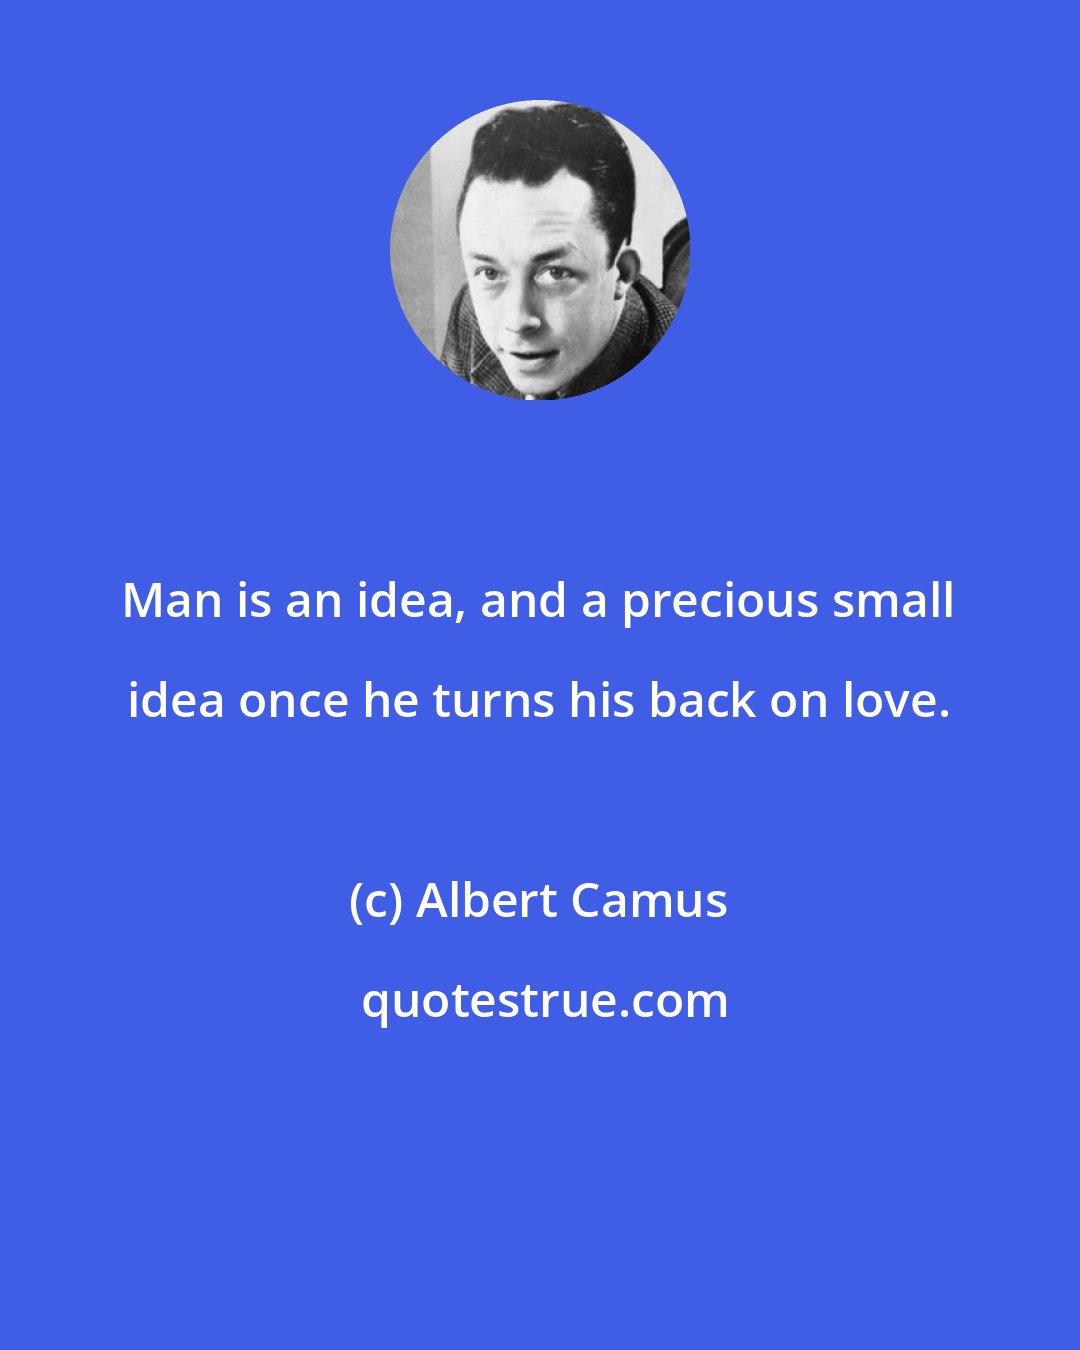 Albert Camus: Man is an idea, and a precious small idea once he turns his back on love.